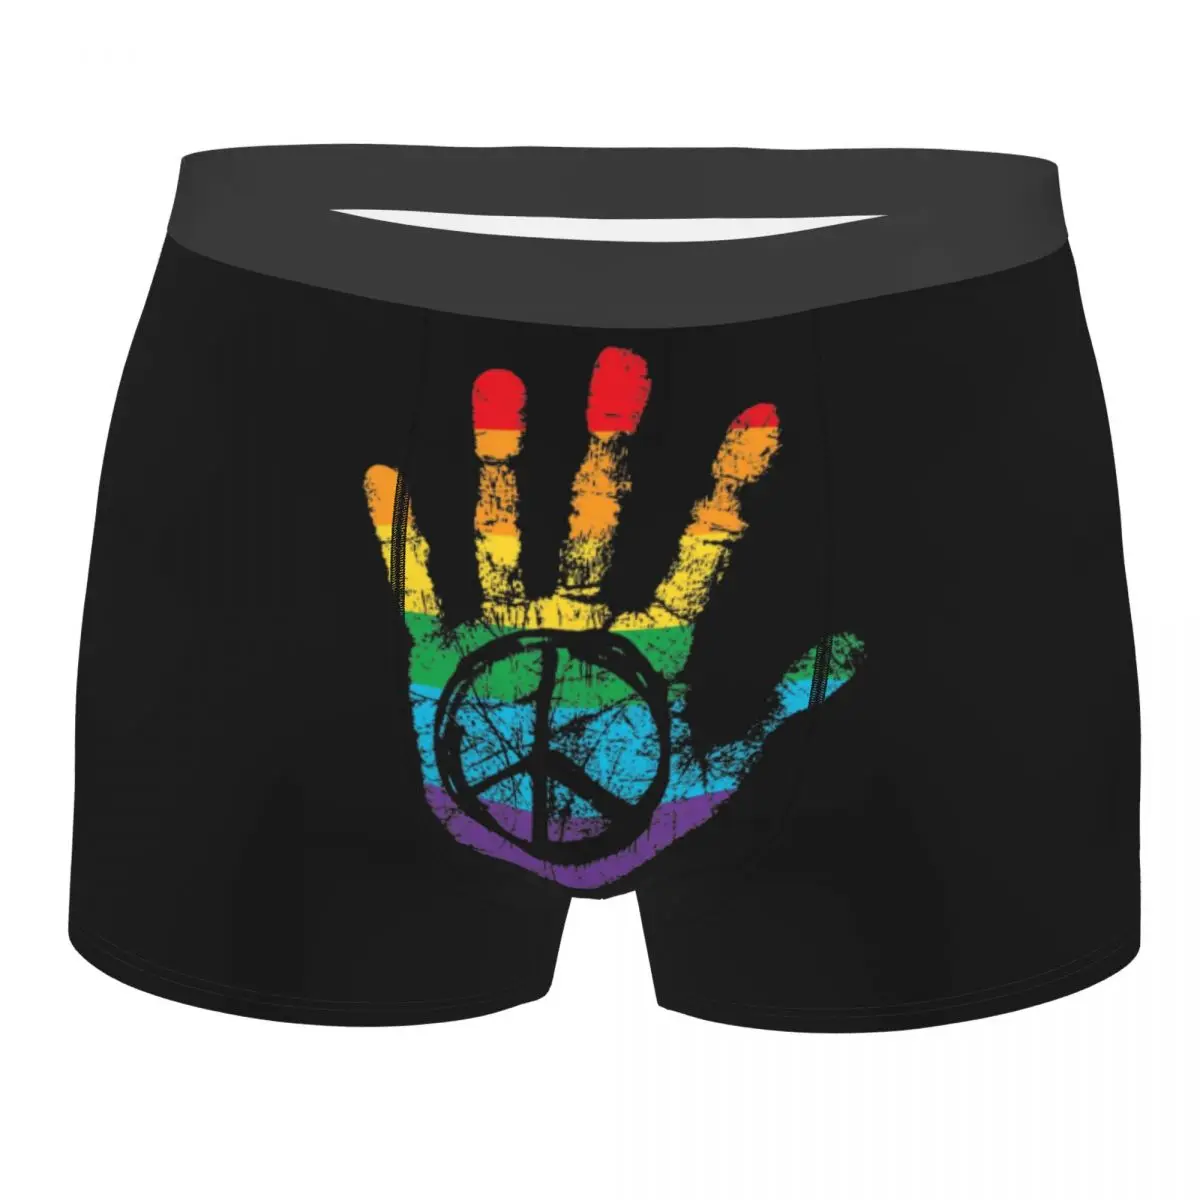 

Funny Boxer Shorts Panties Briefs Men's Hand Peace Rainbow Underwear Gay Pride LGBT Bisexual Queer Underpants for Male Plus Size